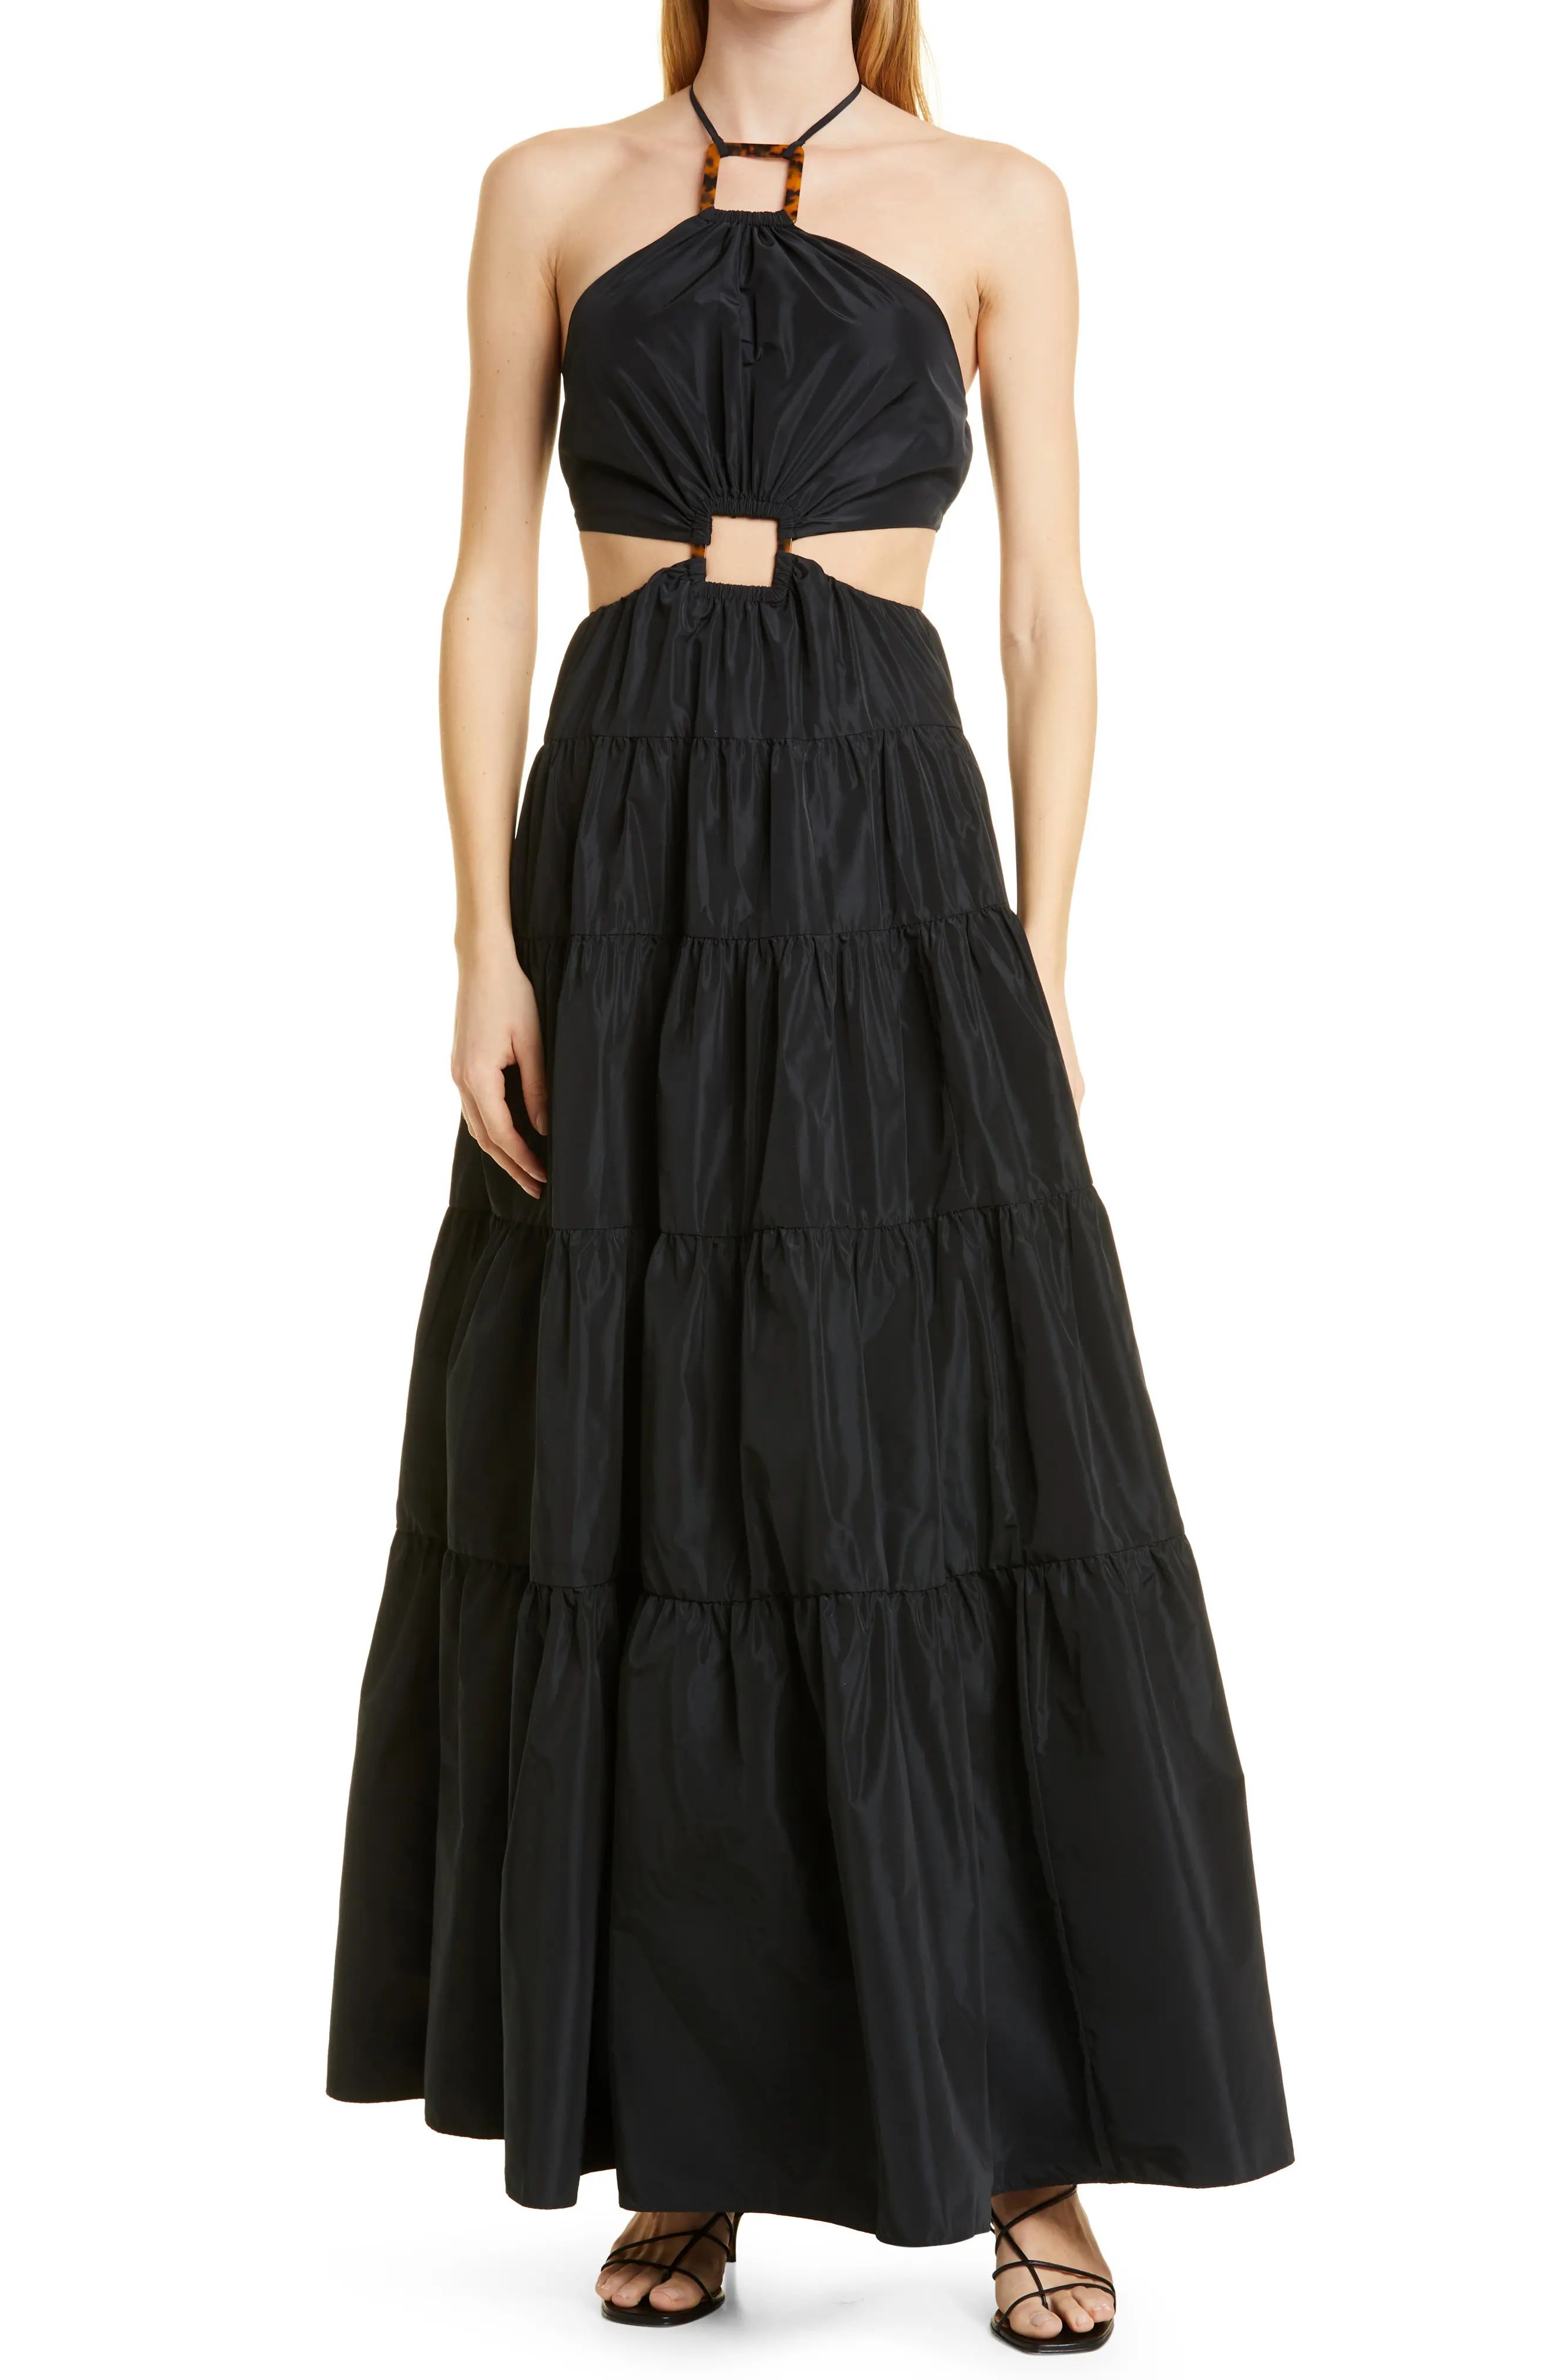 STAUD Dome Cutout Tiered Halter Maxi Dress in Black at Nordstrom, Size X-Small | Nordstrom